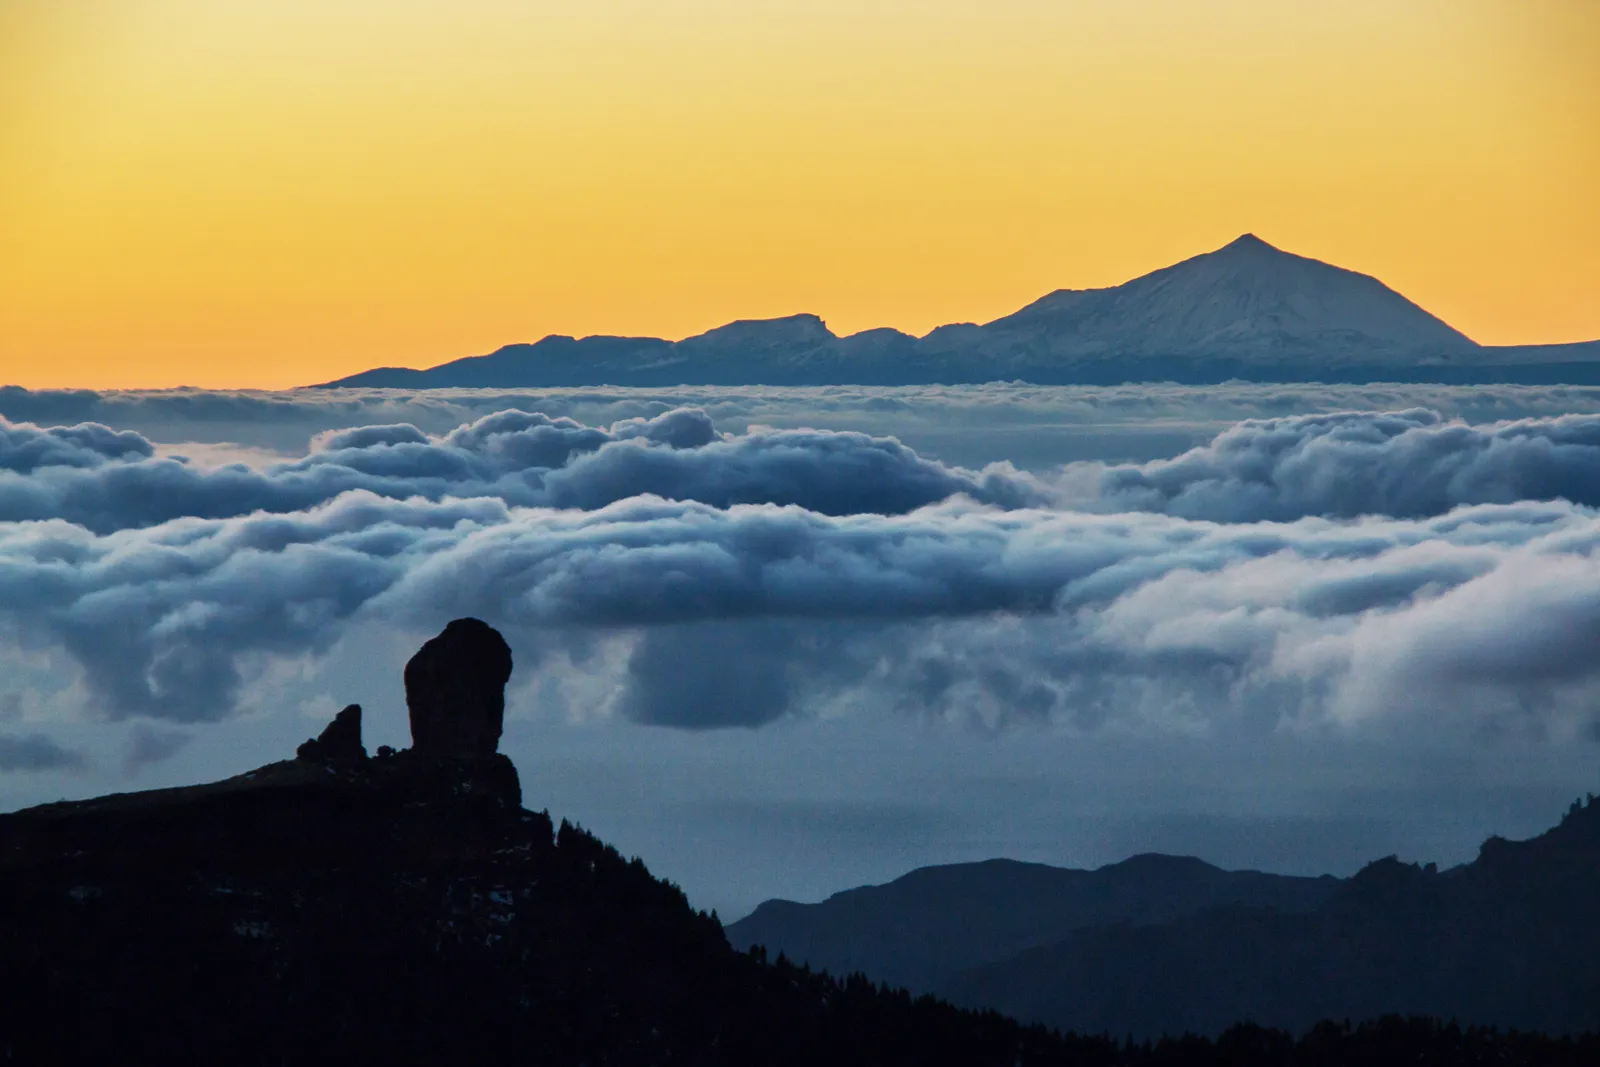 Photographic landscapes Instagrammable to visit in Gran Canaria